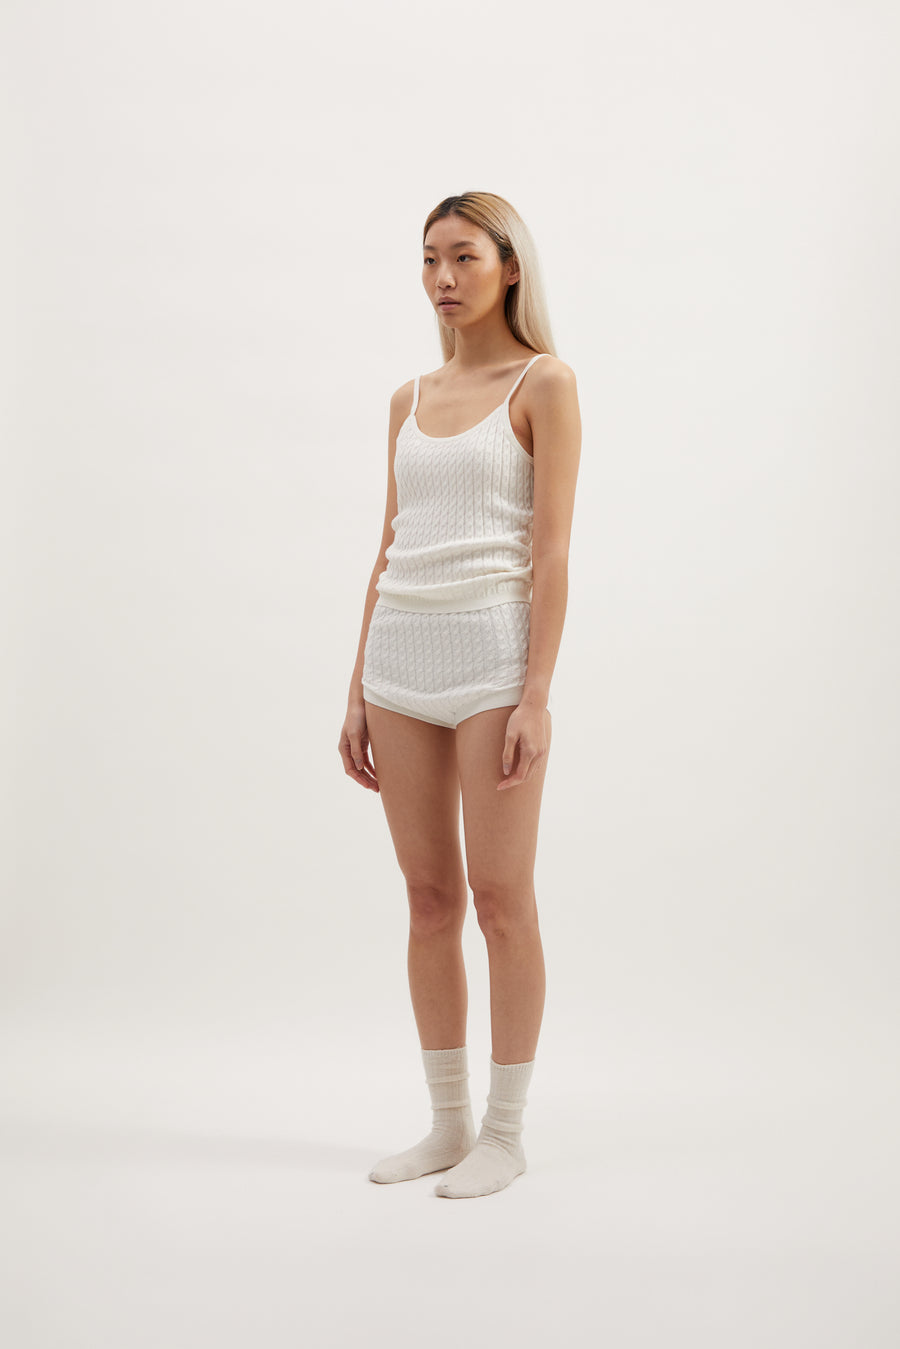 MAE CABLE KNIT SHORTS - IVORY